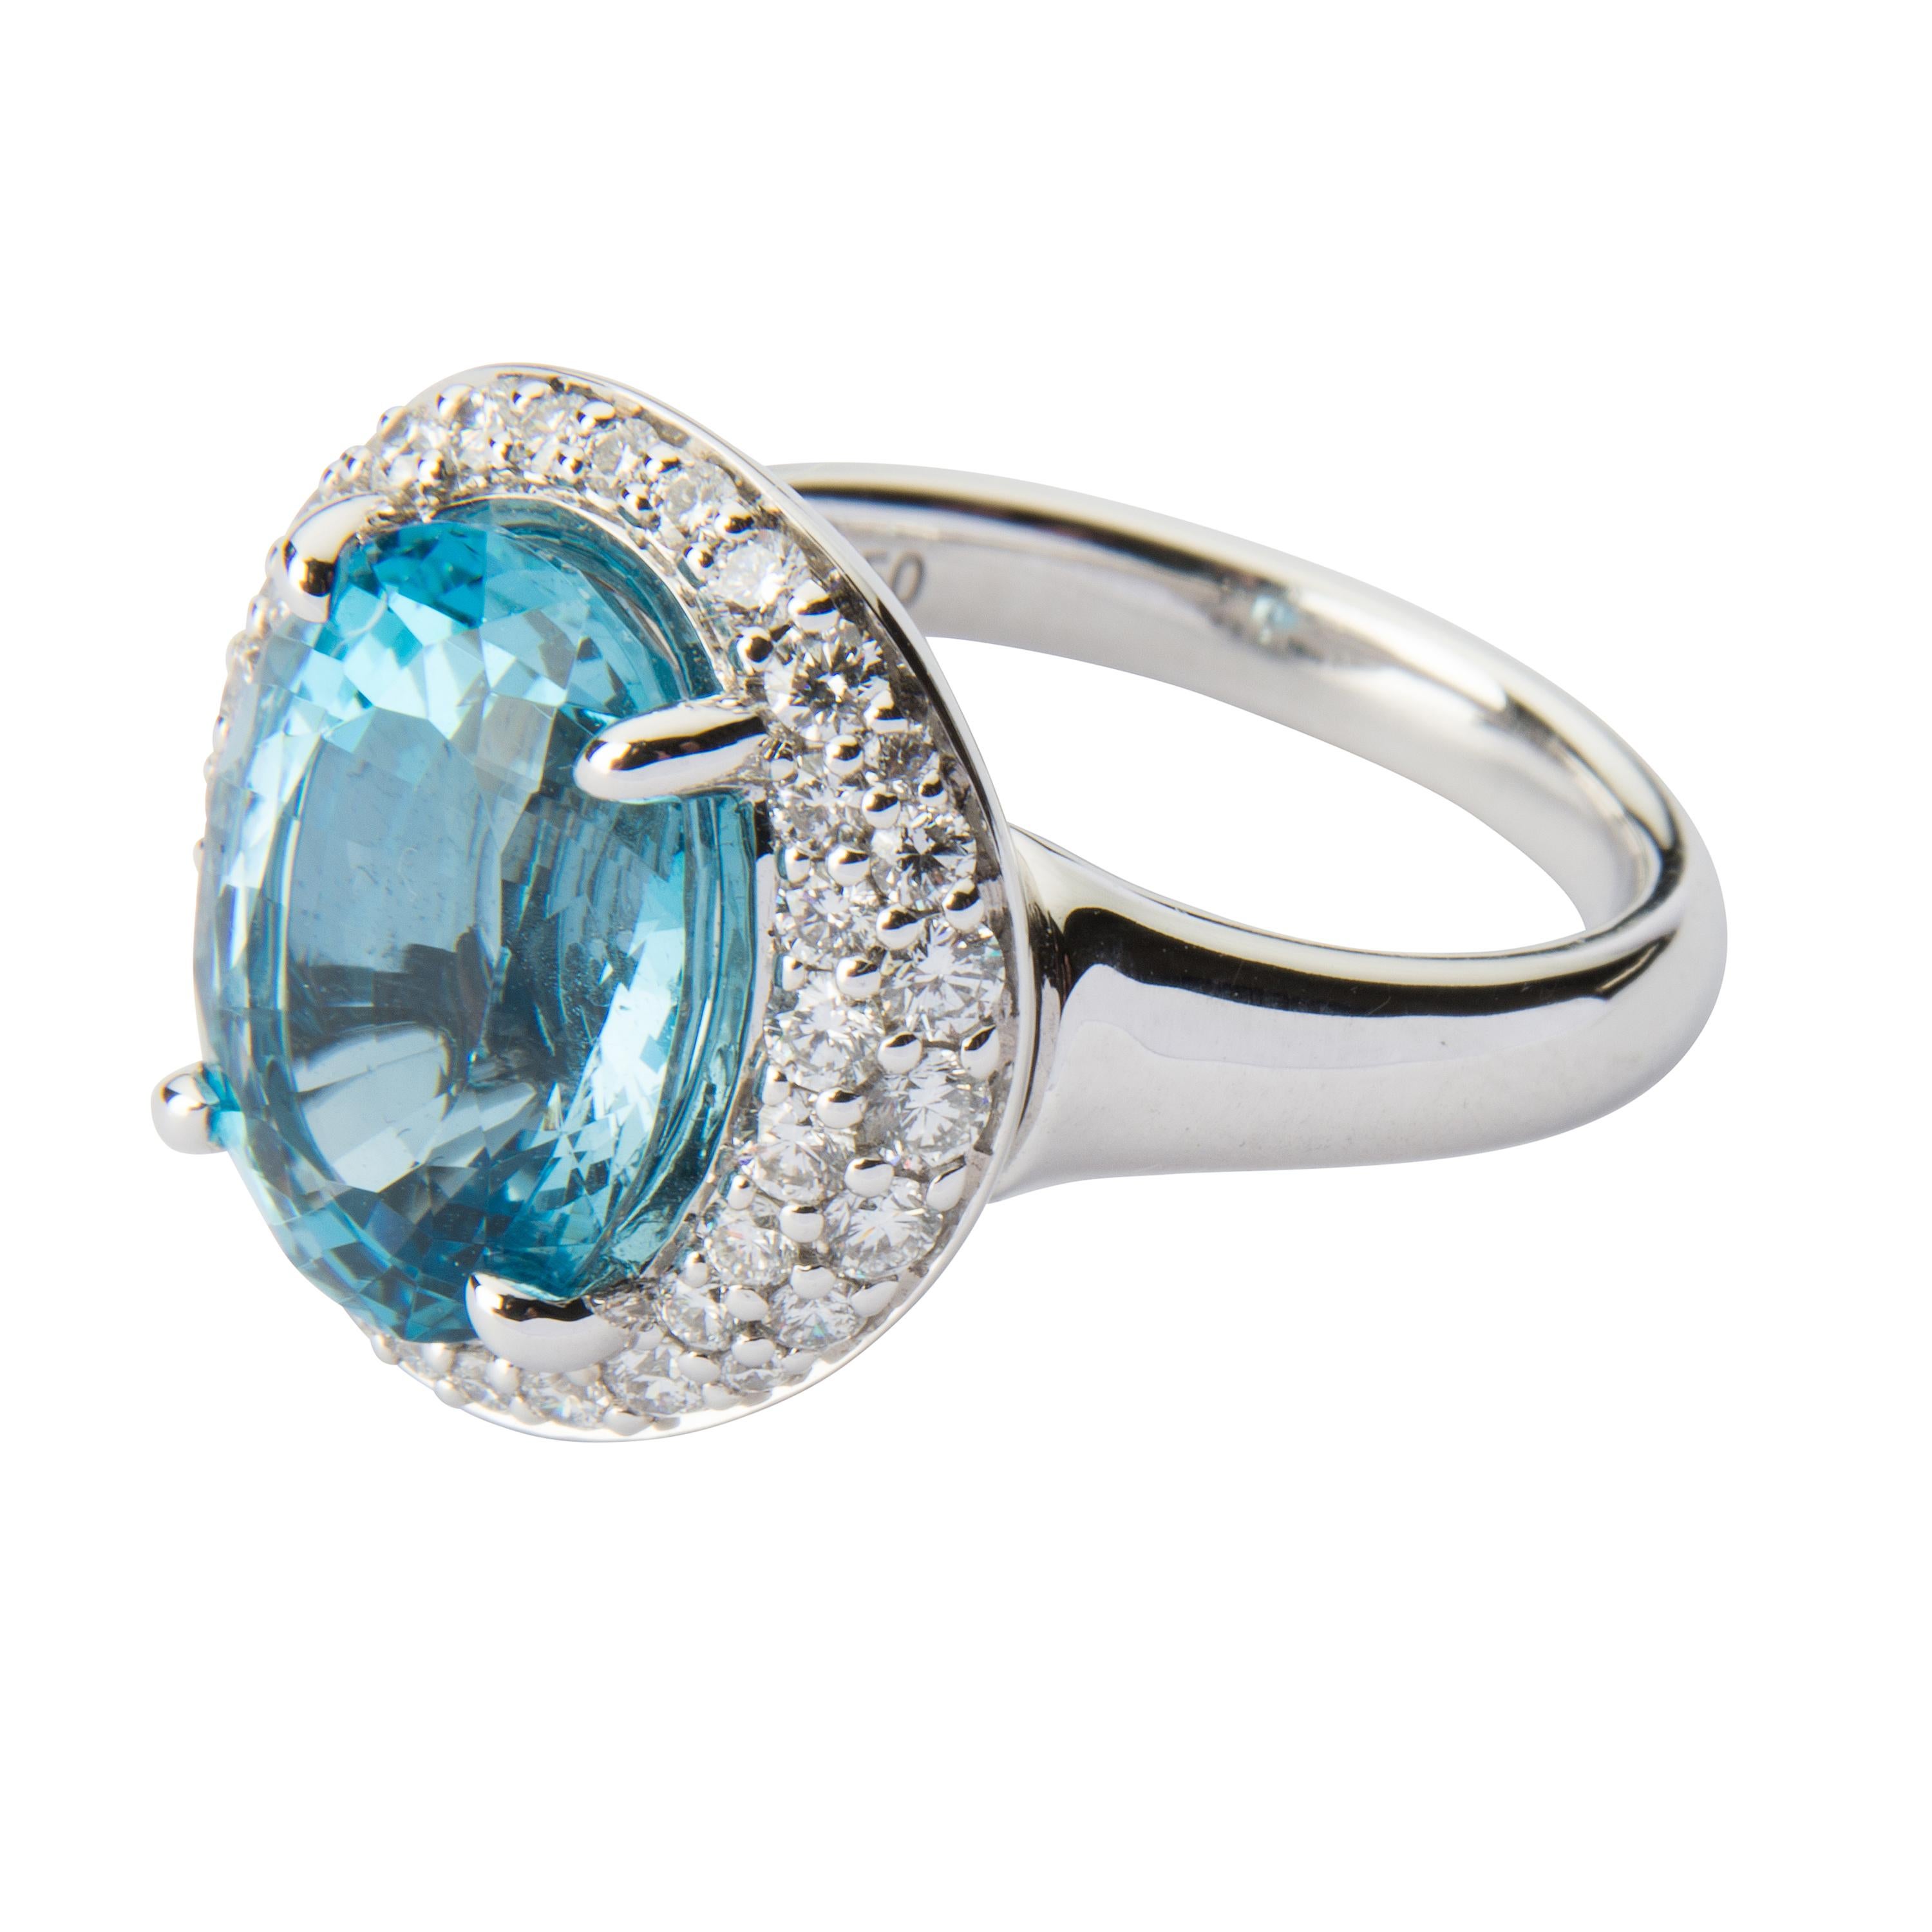 18 Karat White Gold Aquamarine Cocktail Ring In New Condition For Sale In Southbank, Victoria